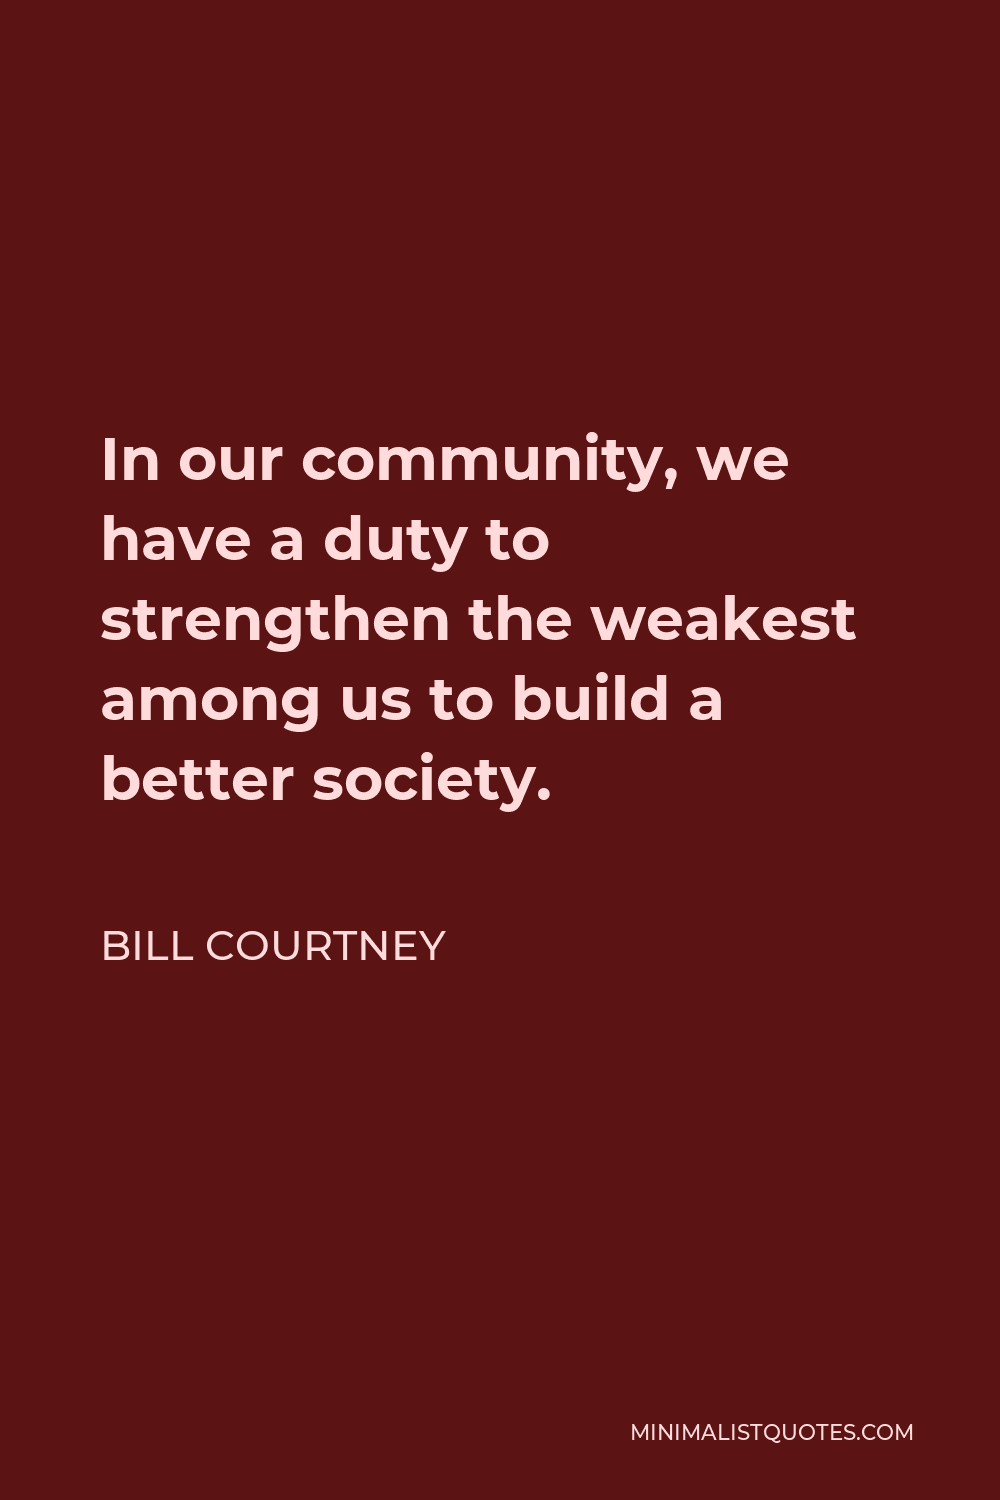 Bill Courtney Quote - In our community, we have a duty to strengthen the weakest among us to build a better society.